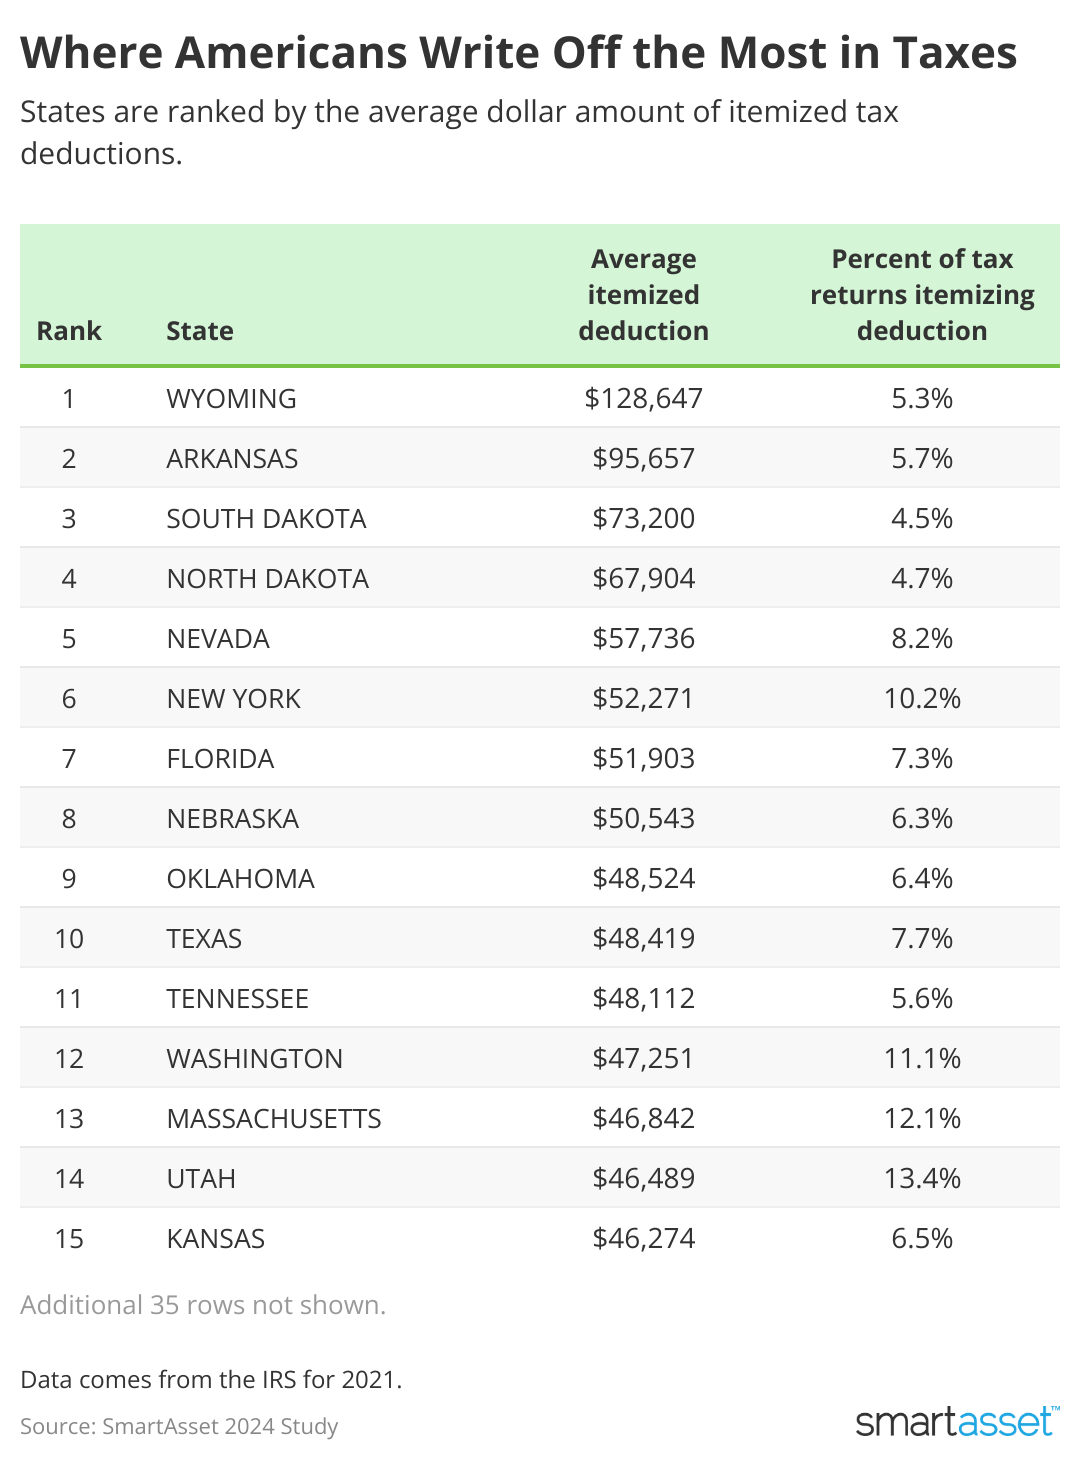 chart showing top 15 states where residents write off most in taxes